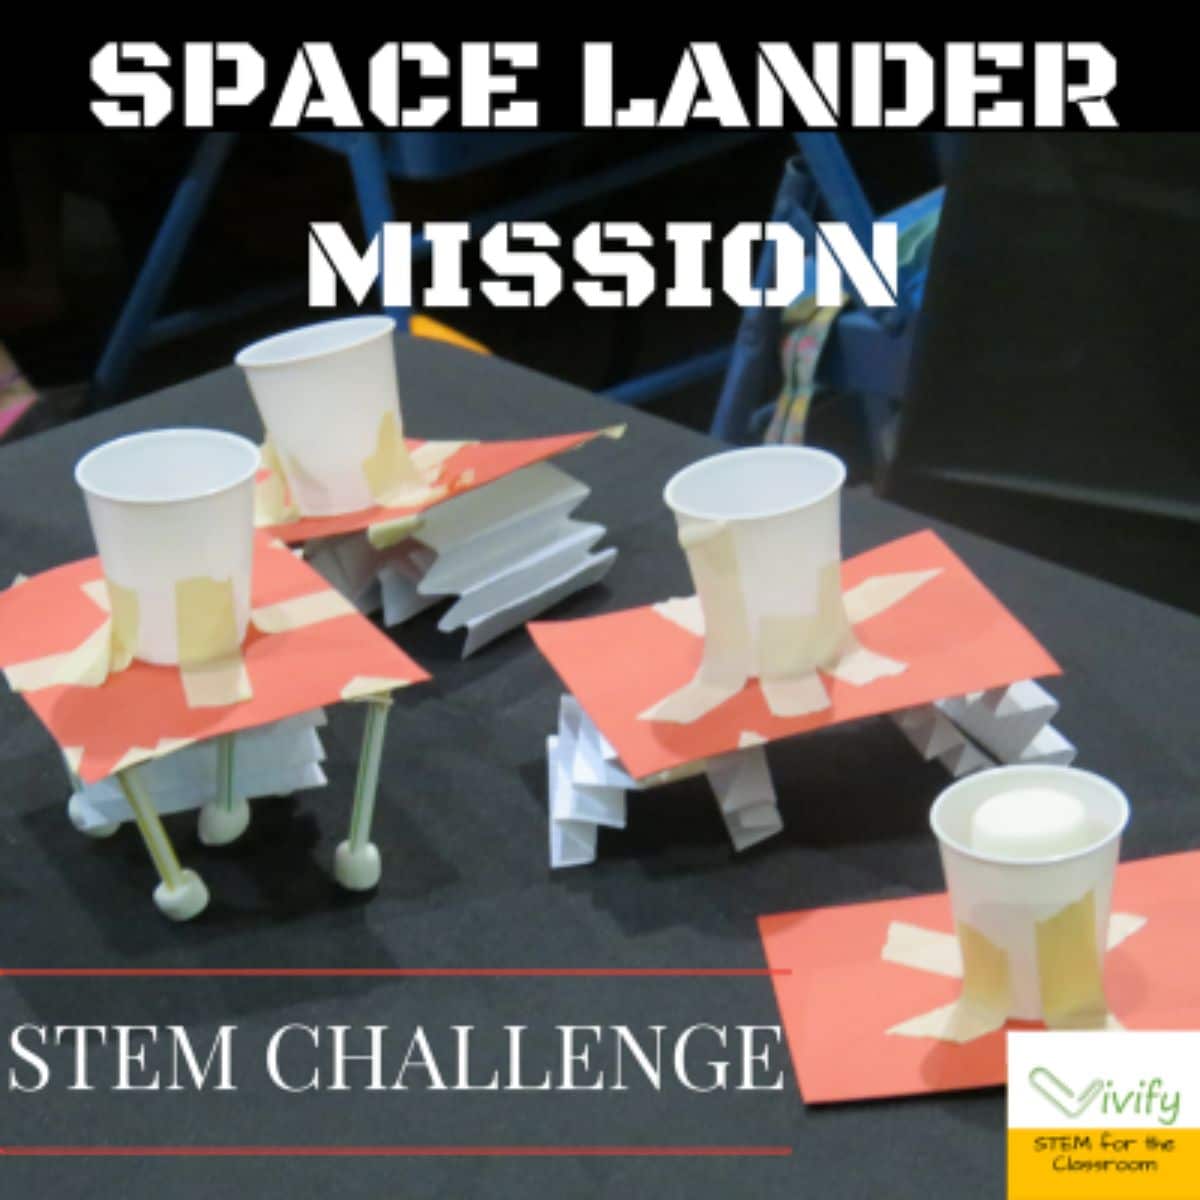 The text reads "Space Lander Mission STEM Challenge" the image is of space landers made out of card, cups and straws